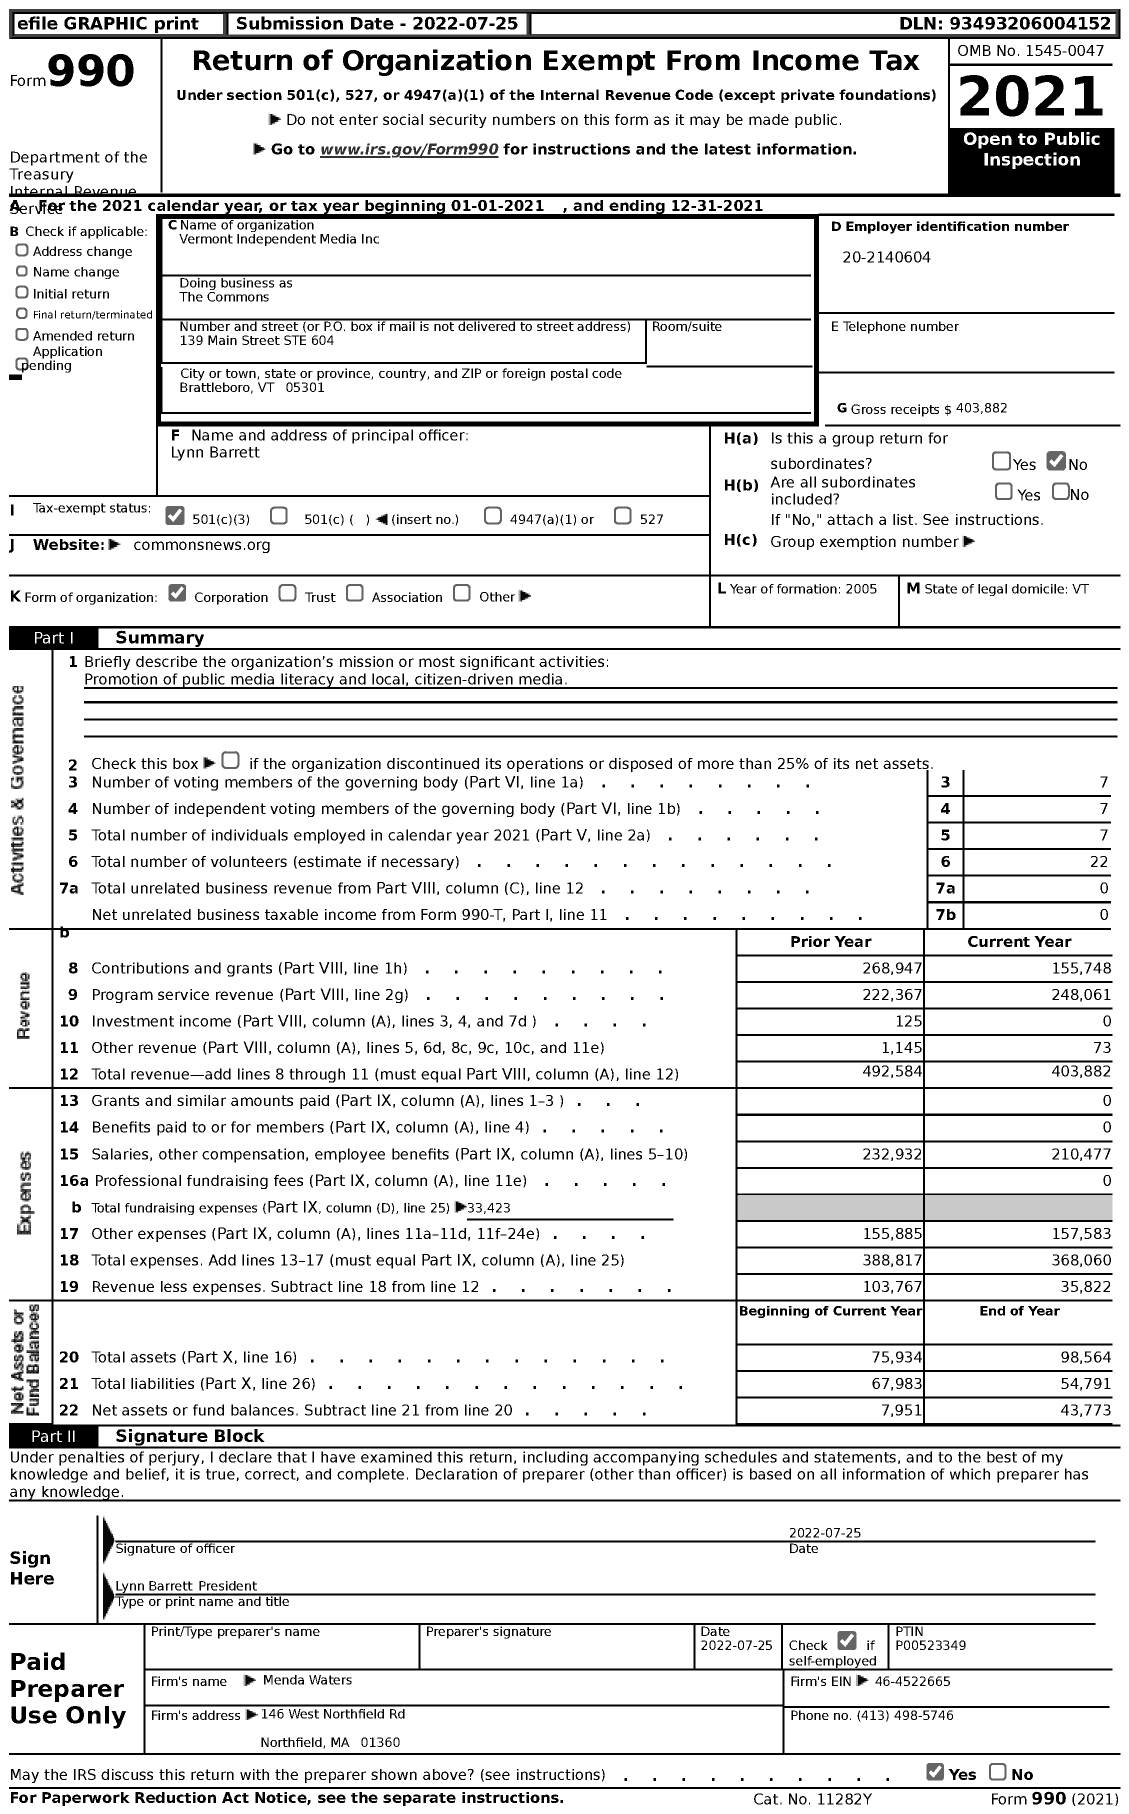 Image of first page of 2021 Form 990 for The Commons / Vermont Independent Media Inc